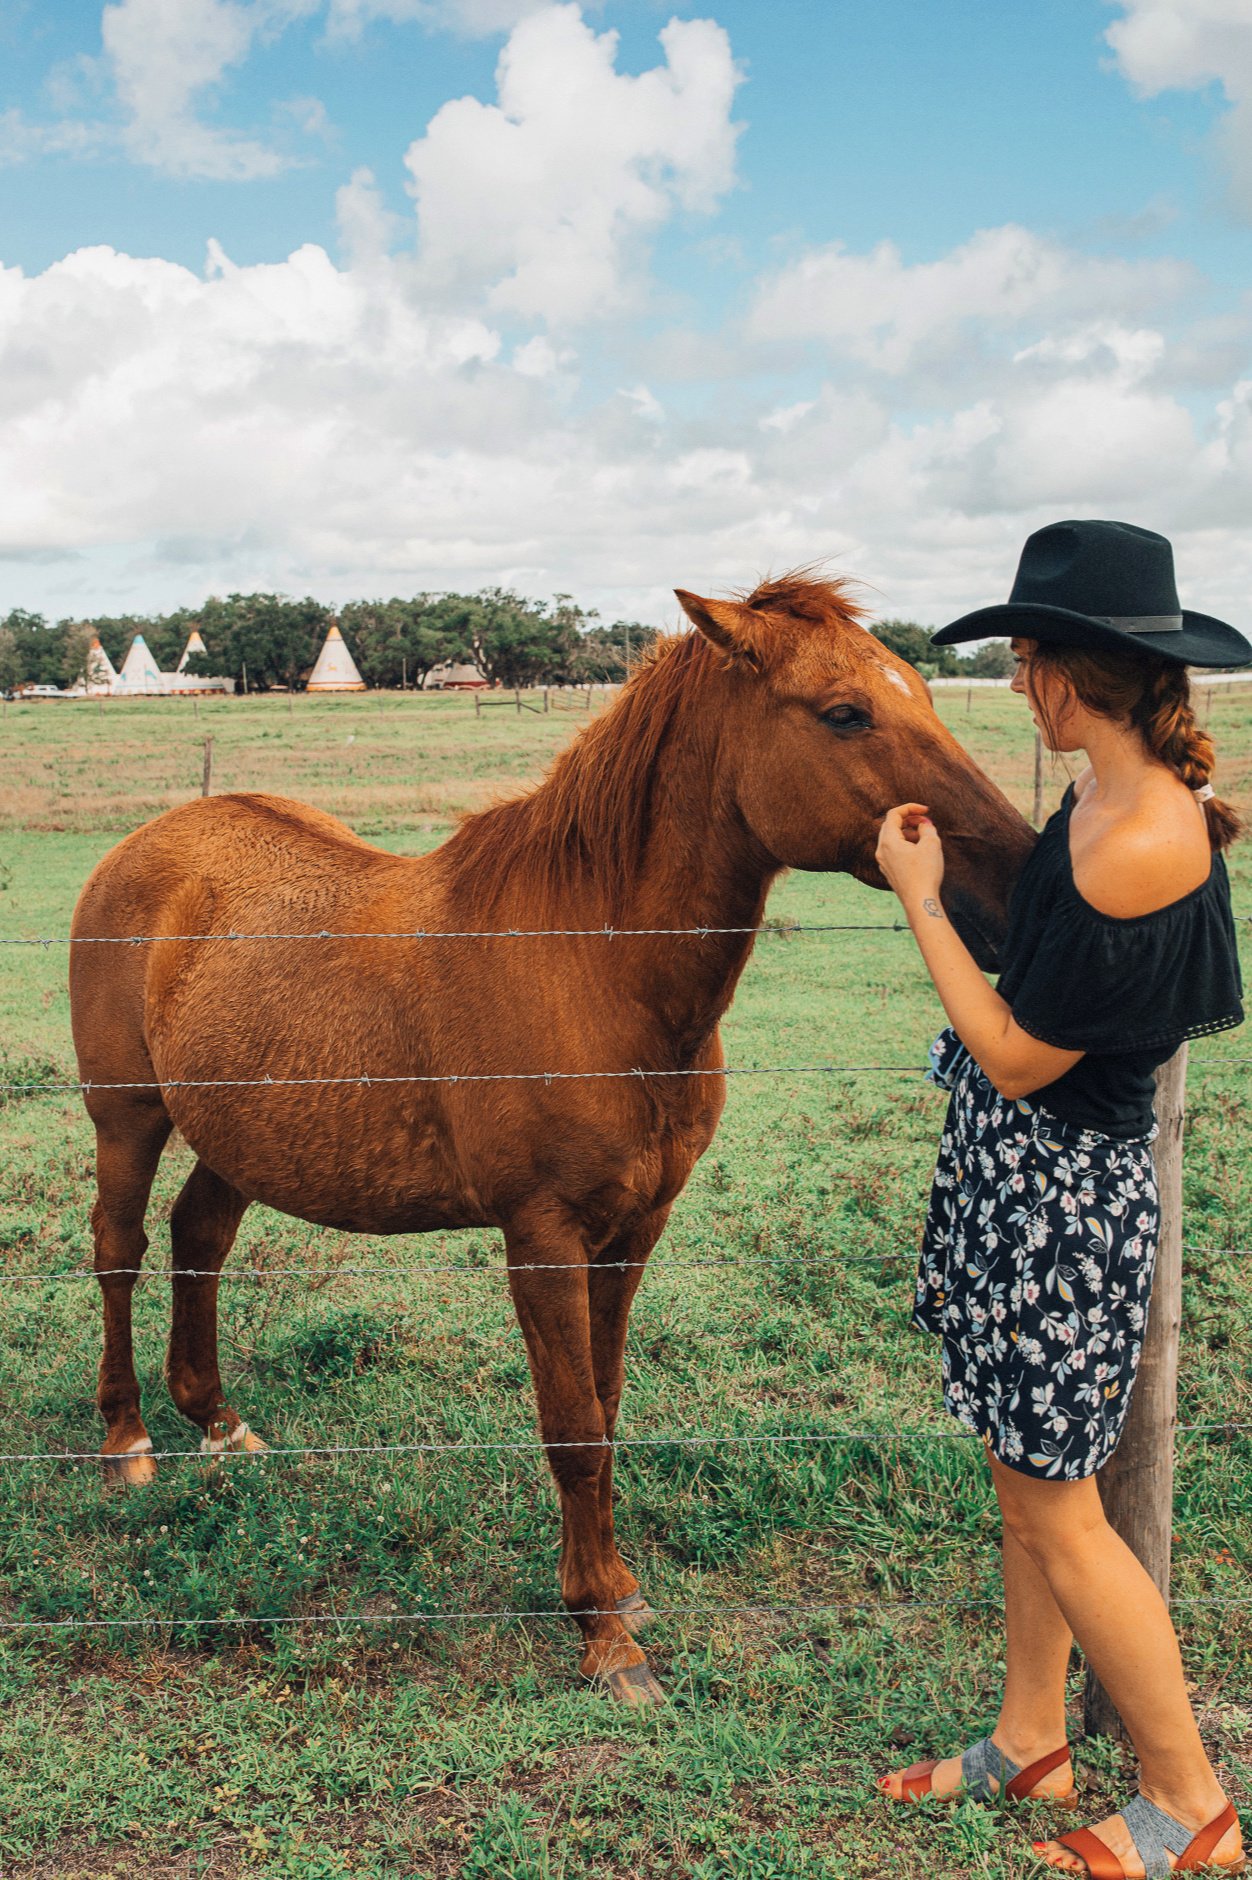 Westgate Ranch, Westgate resorts, West gate ranch, Westgate river ranch, florida, horseback riding, glamping, tent, teepee, horseback riding, skeet shooting, archery, adult summer camp, rodeo, country, cowgirl, horses, farm, Orlando florida, glamping experience , campfire